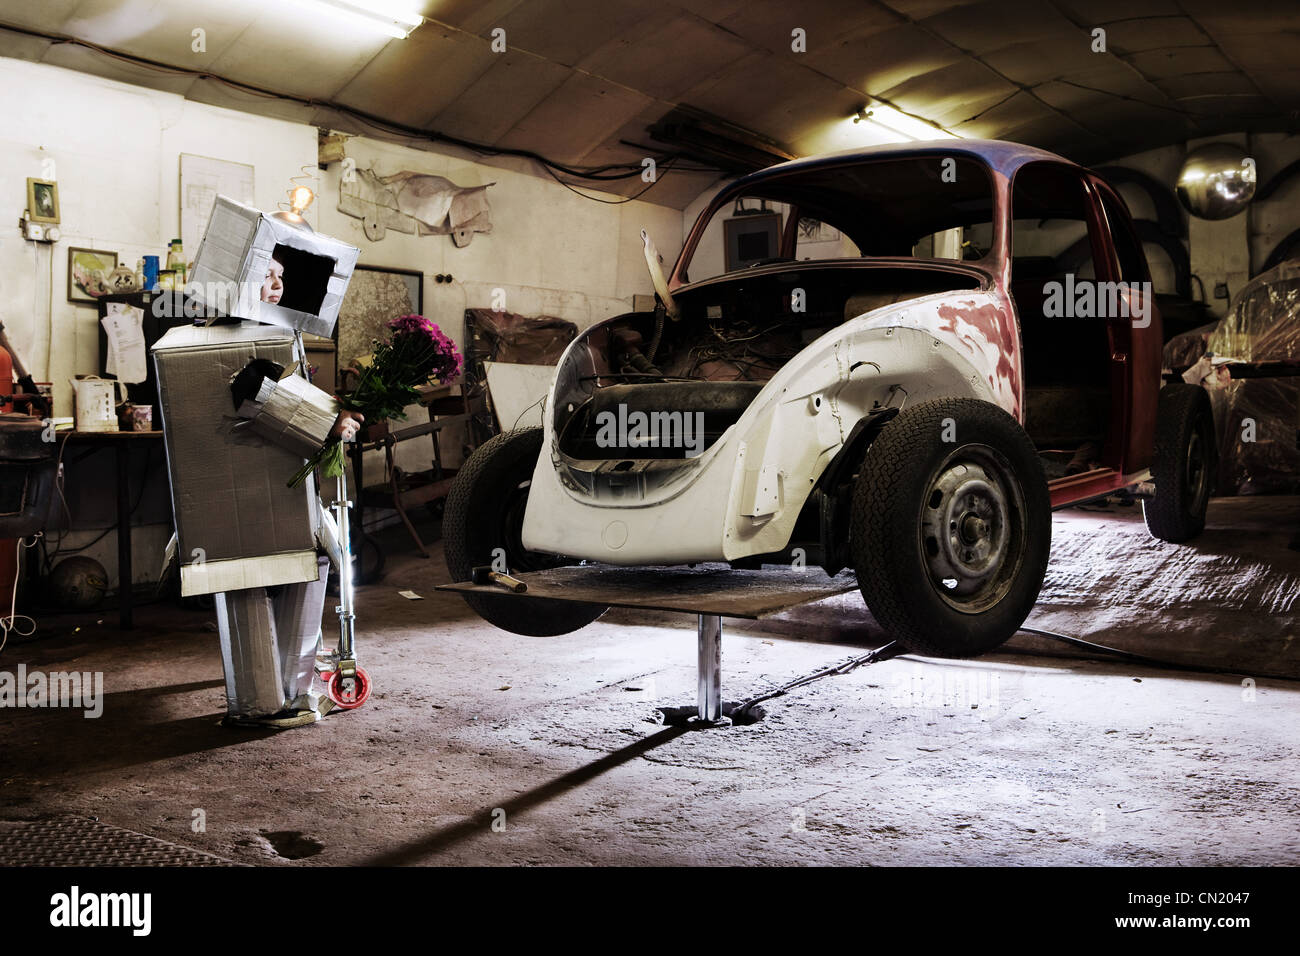 Boy dressed as robot holding bunch of flowers with old car in garage Stock Photo